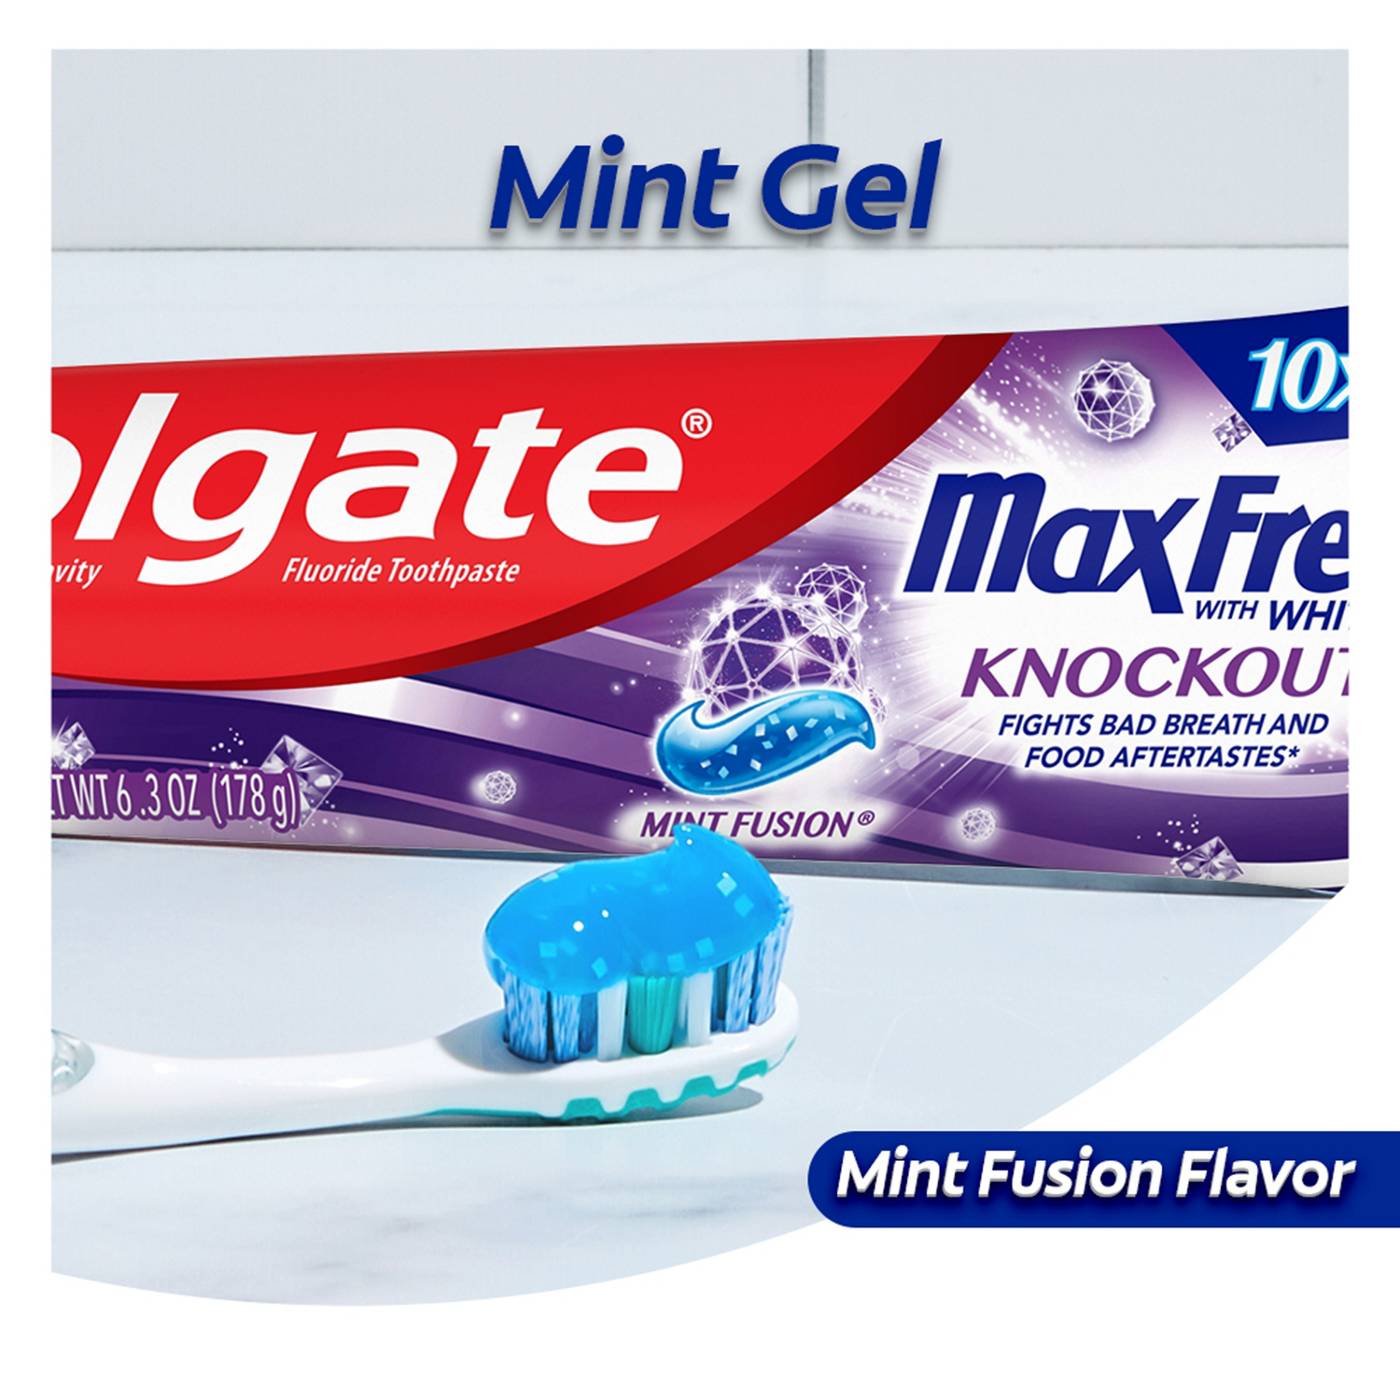 Colgate Max Fresh Anticavity Toothpaste - Mint Fusion; image 14 of 16